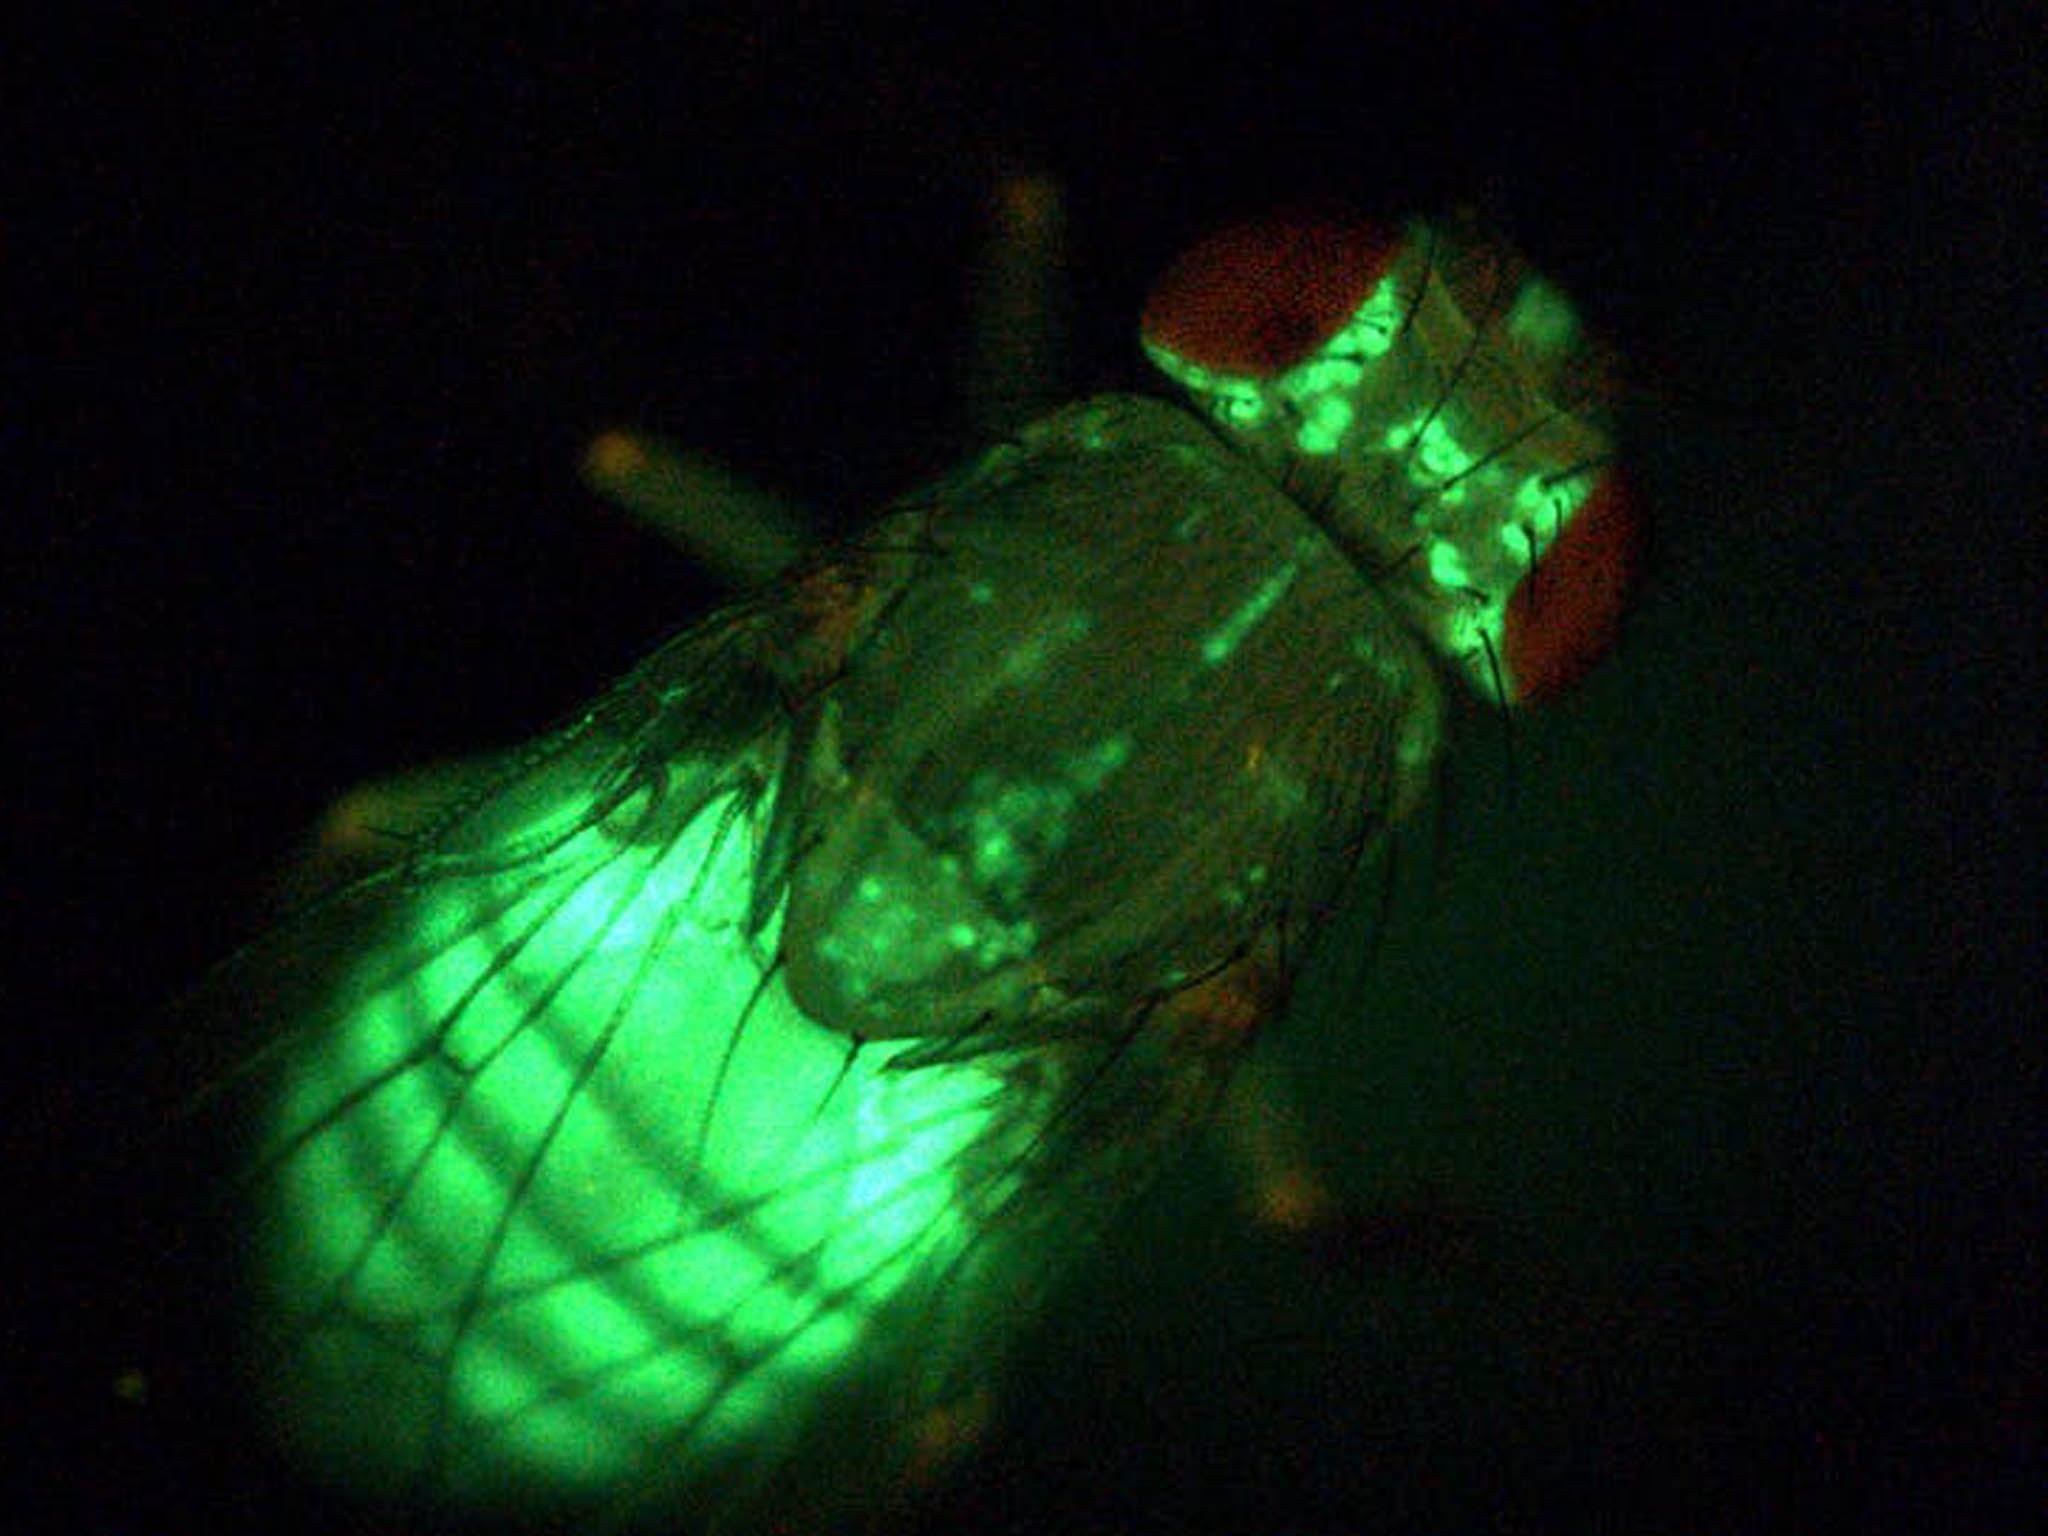 After researchers ‘turned off’ MG in flies, the insects developed insulin resistance